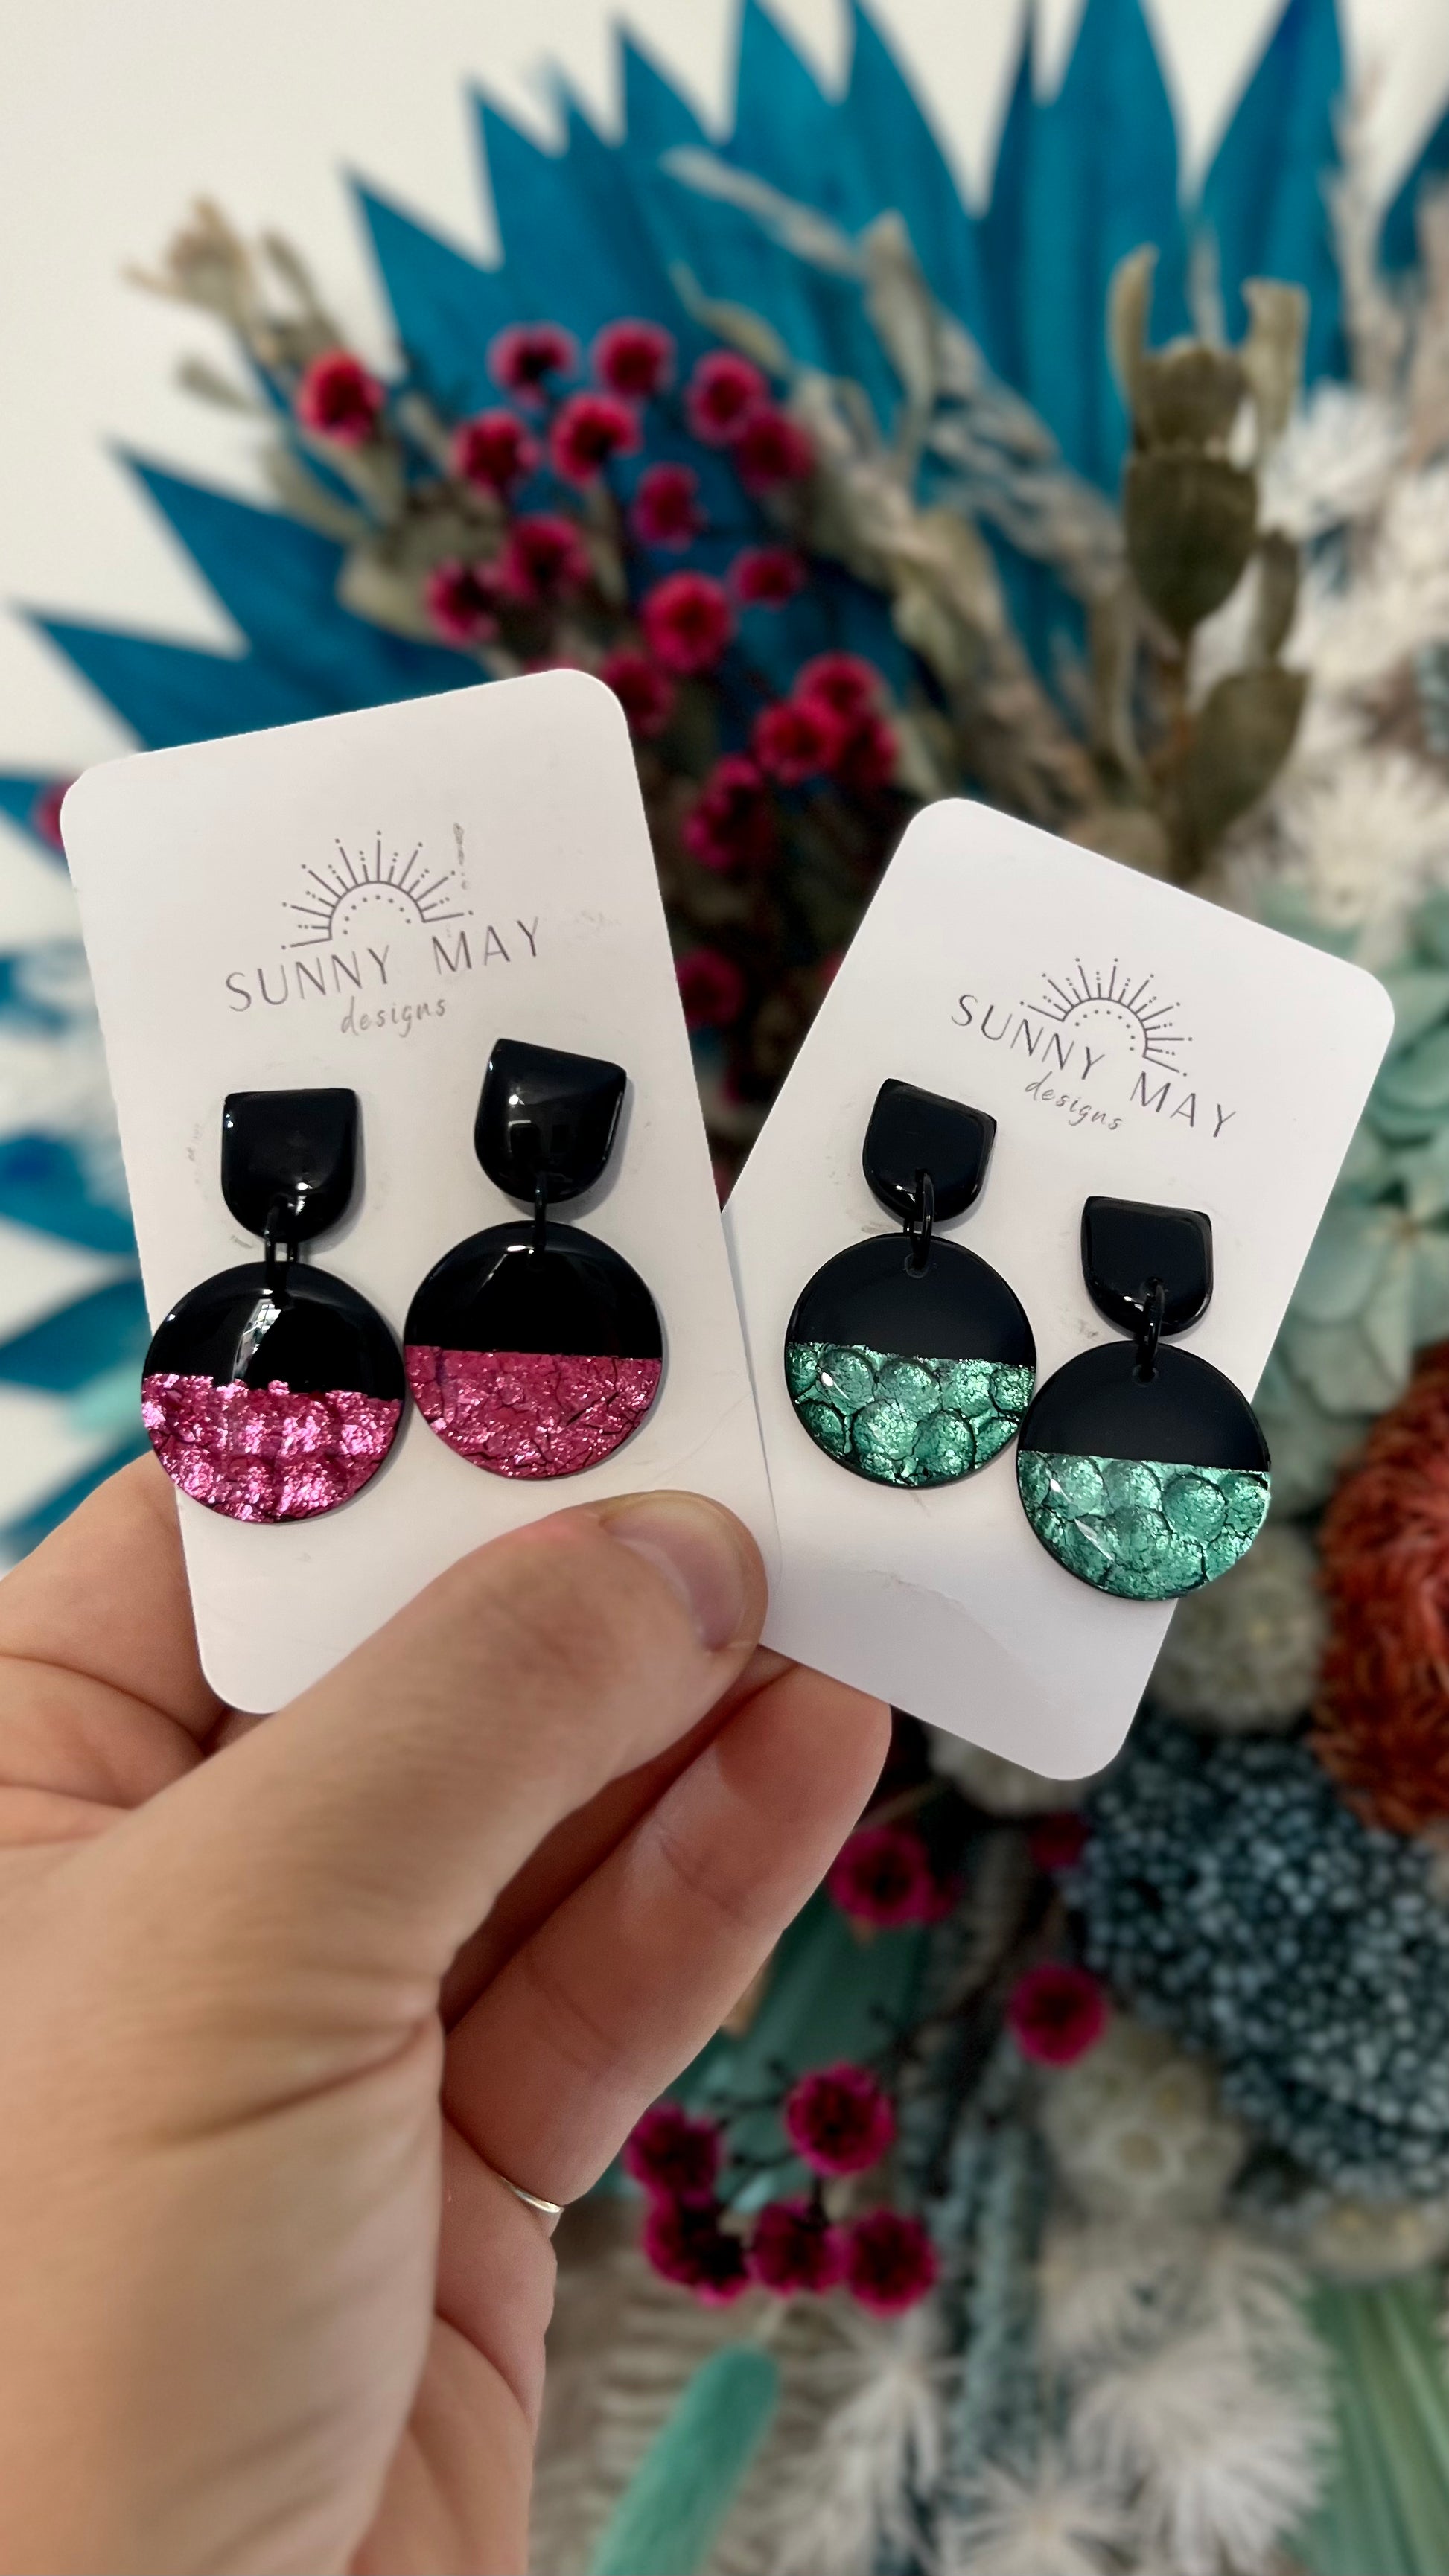 Sunny May Black Foil Earrings: These earrings are handmade from a delightful mix of gloss black with a vibrant contrasting foil feature
These gorgeous pieces are made in Perth WA  - Ciao Bella Dresses 